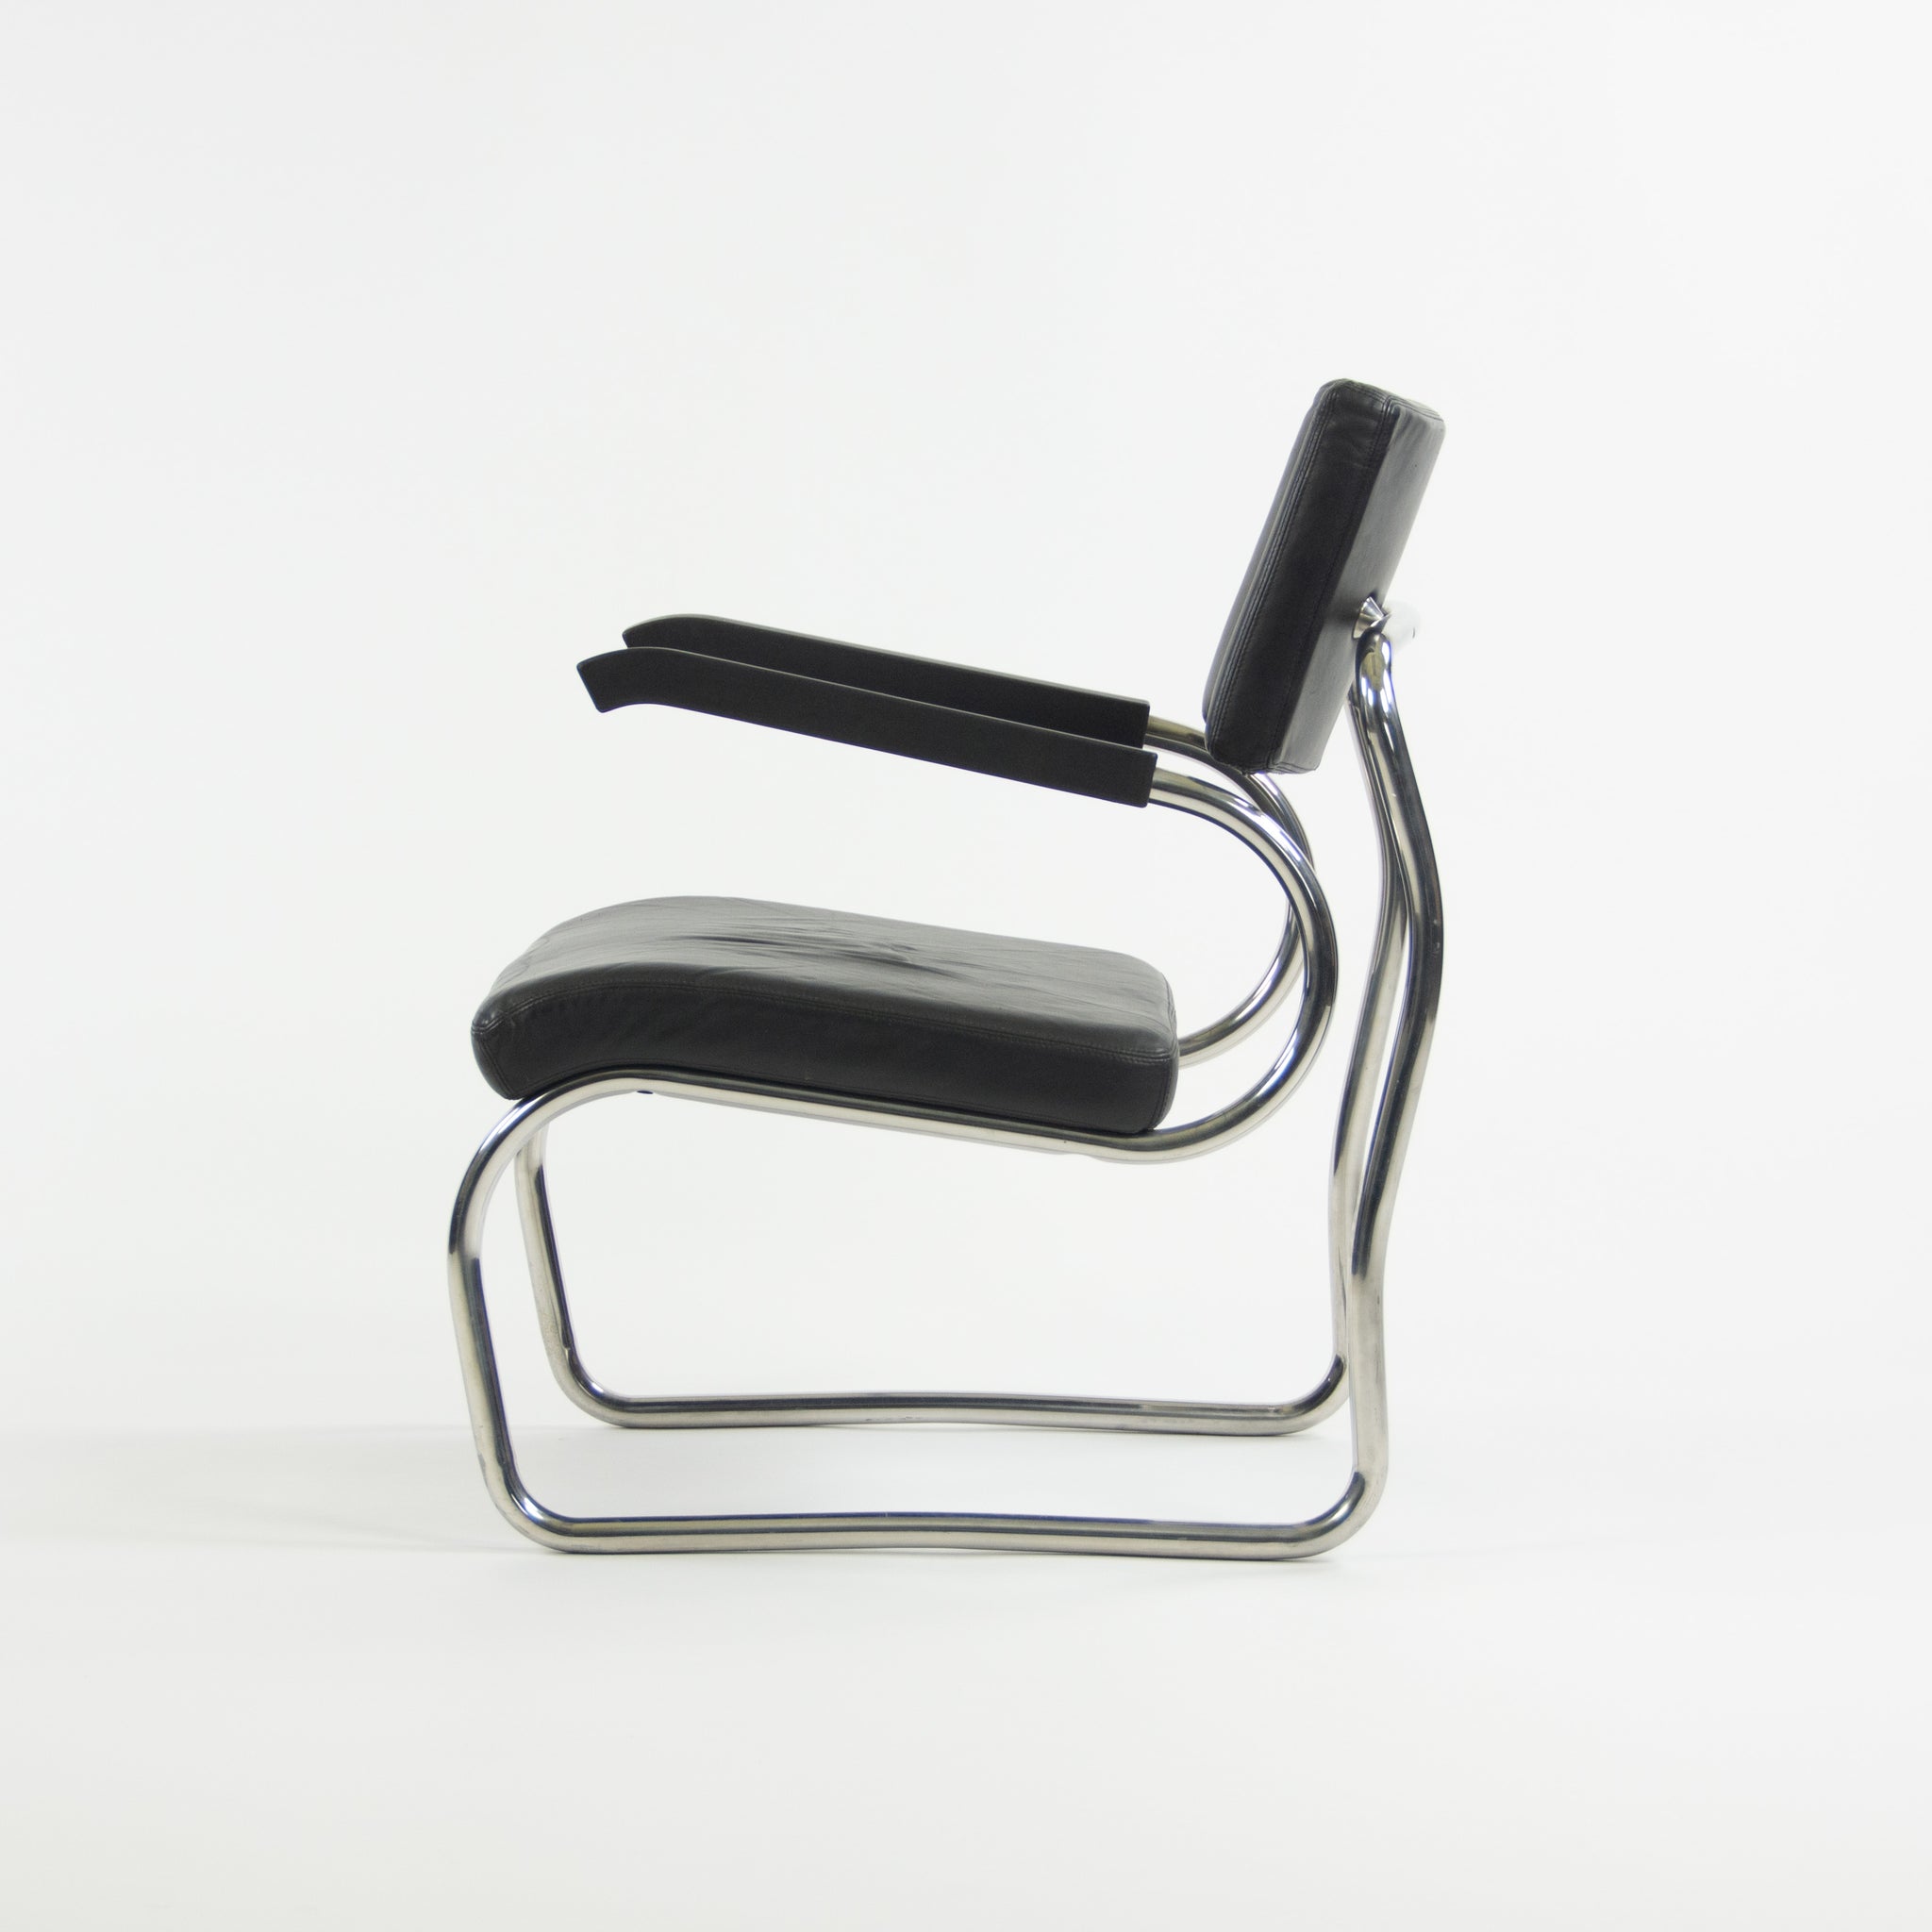 1990s Pair of Sant'elia Arm Chairs by Giuseppe Terragni for Zanotta Leather & Stainless